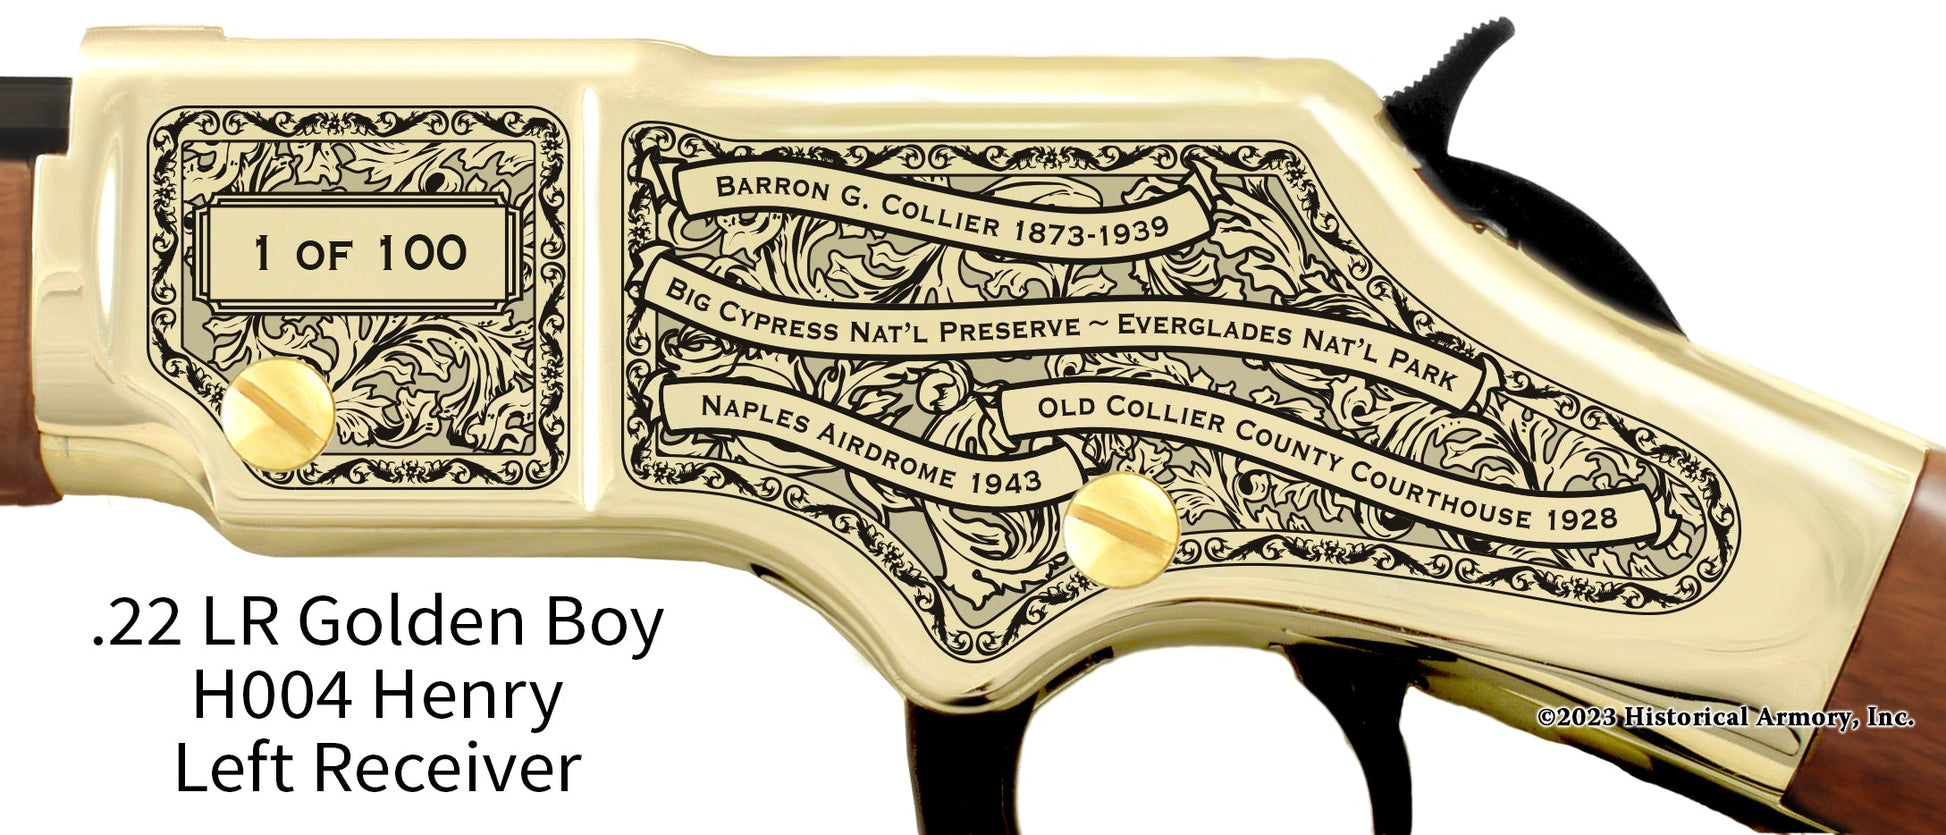 Collier County Florida Engraved Henry Golden Boy Rifle